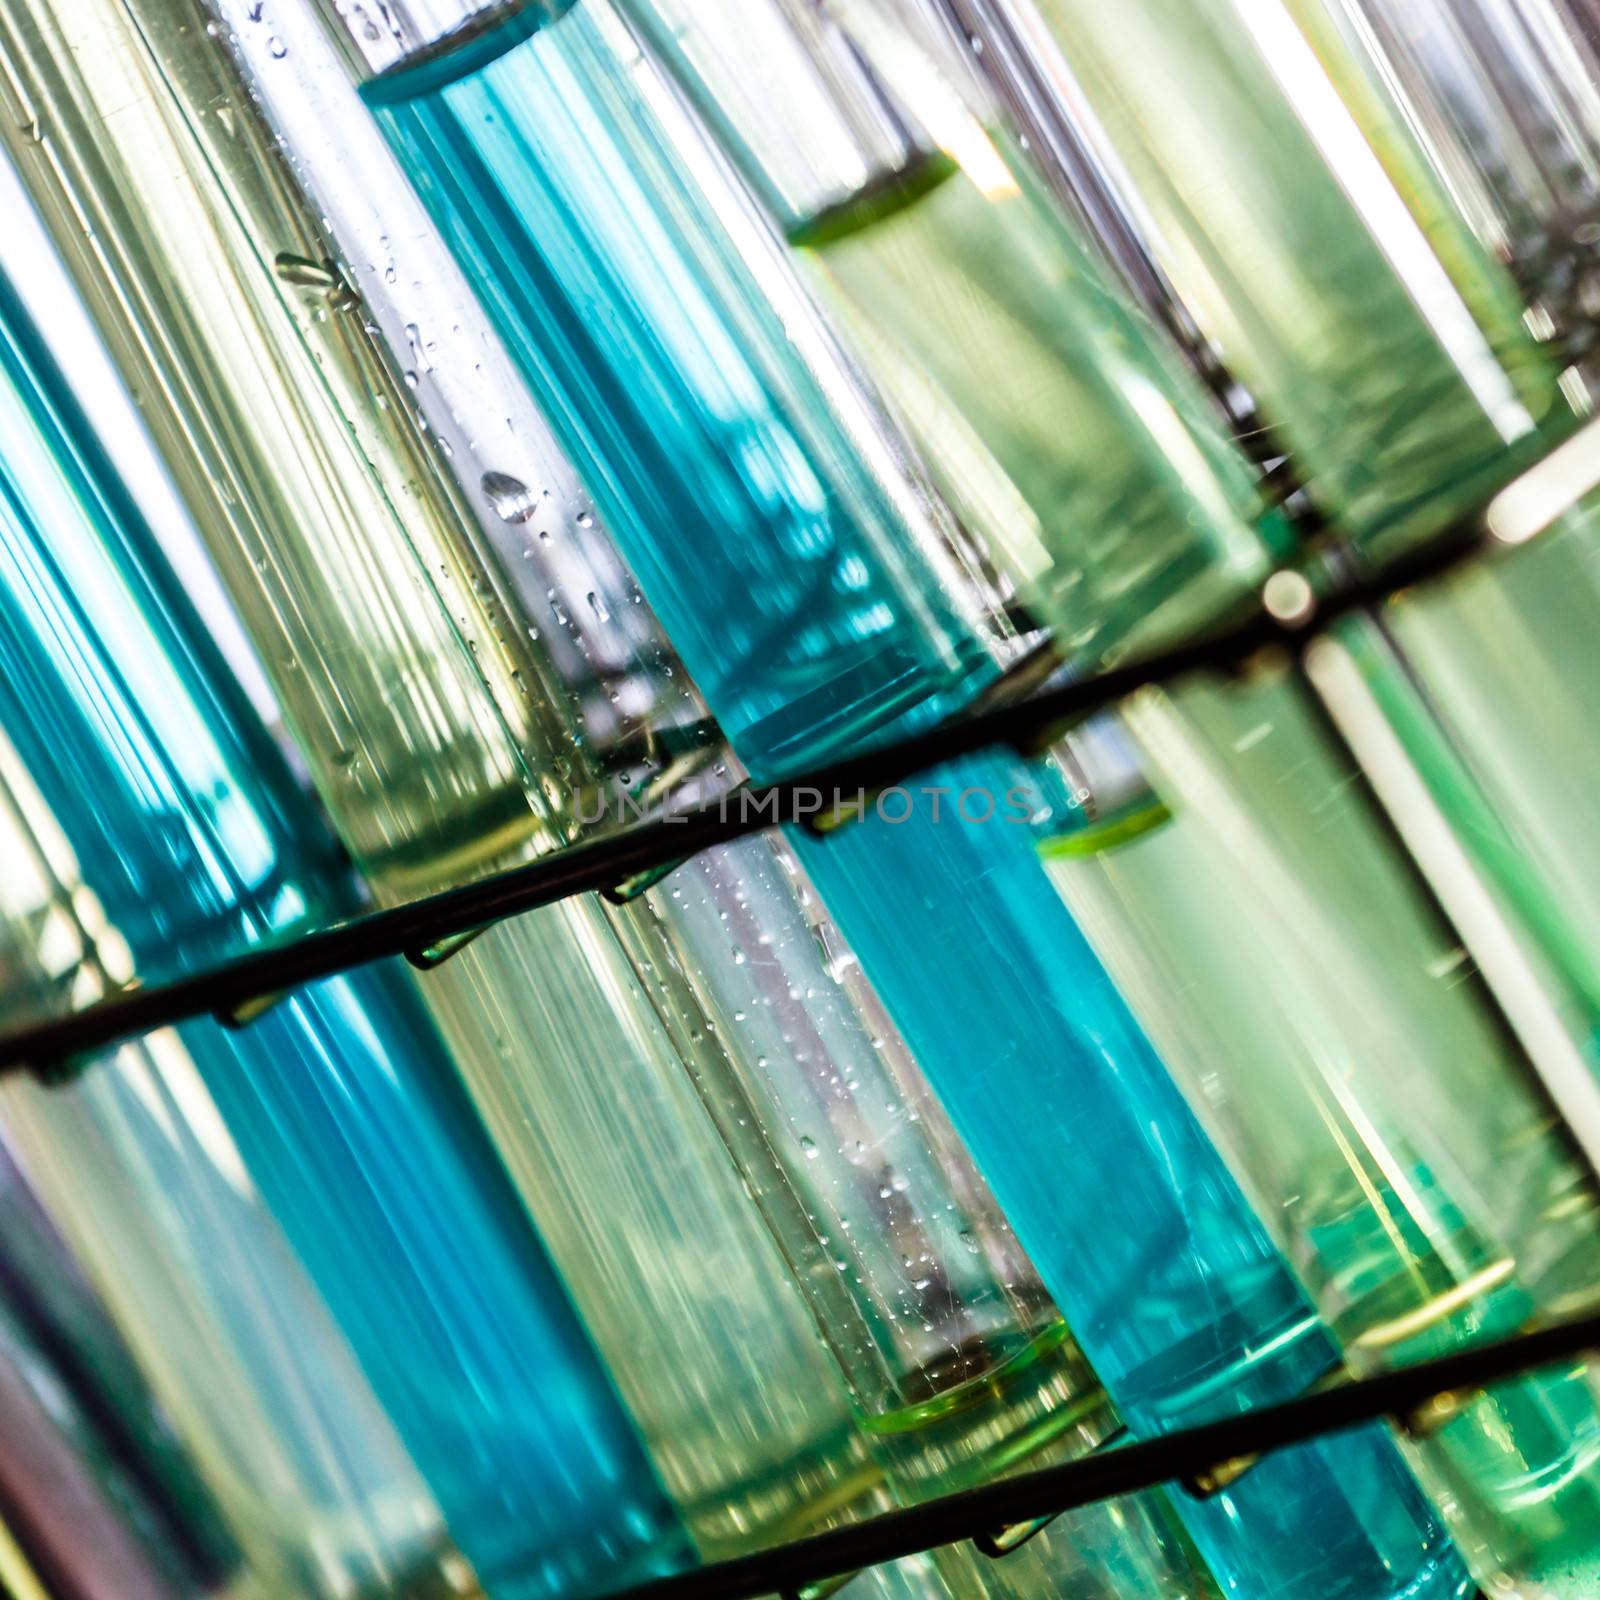 Laboratory glass test tubes. by kasto